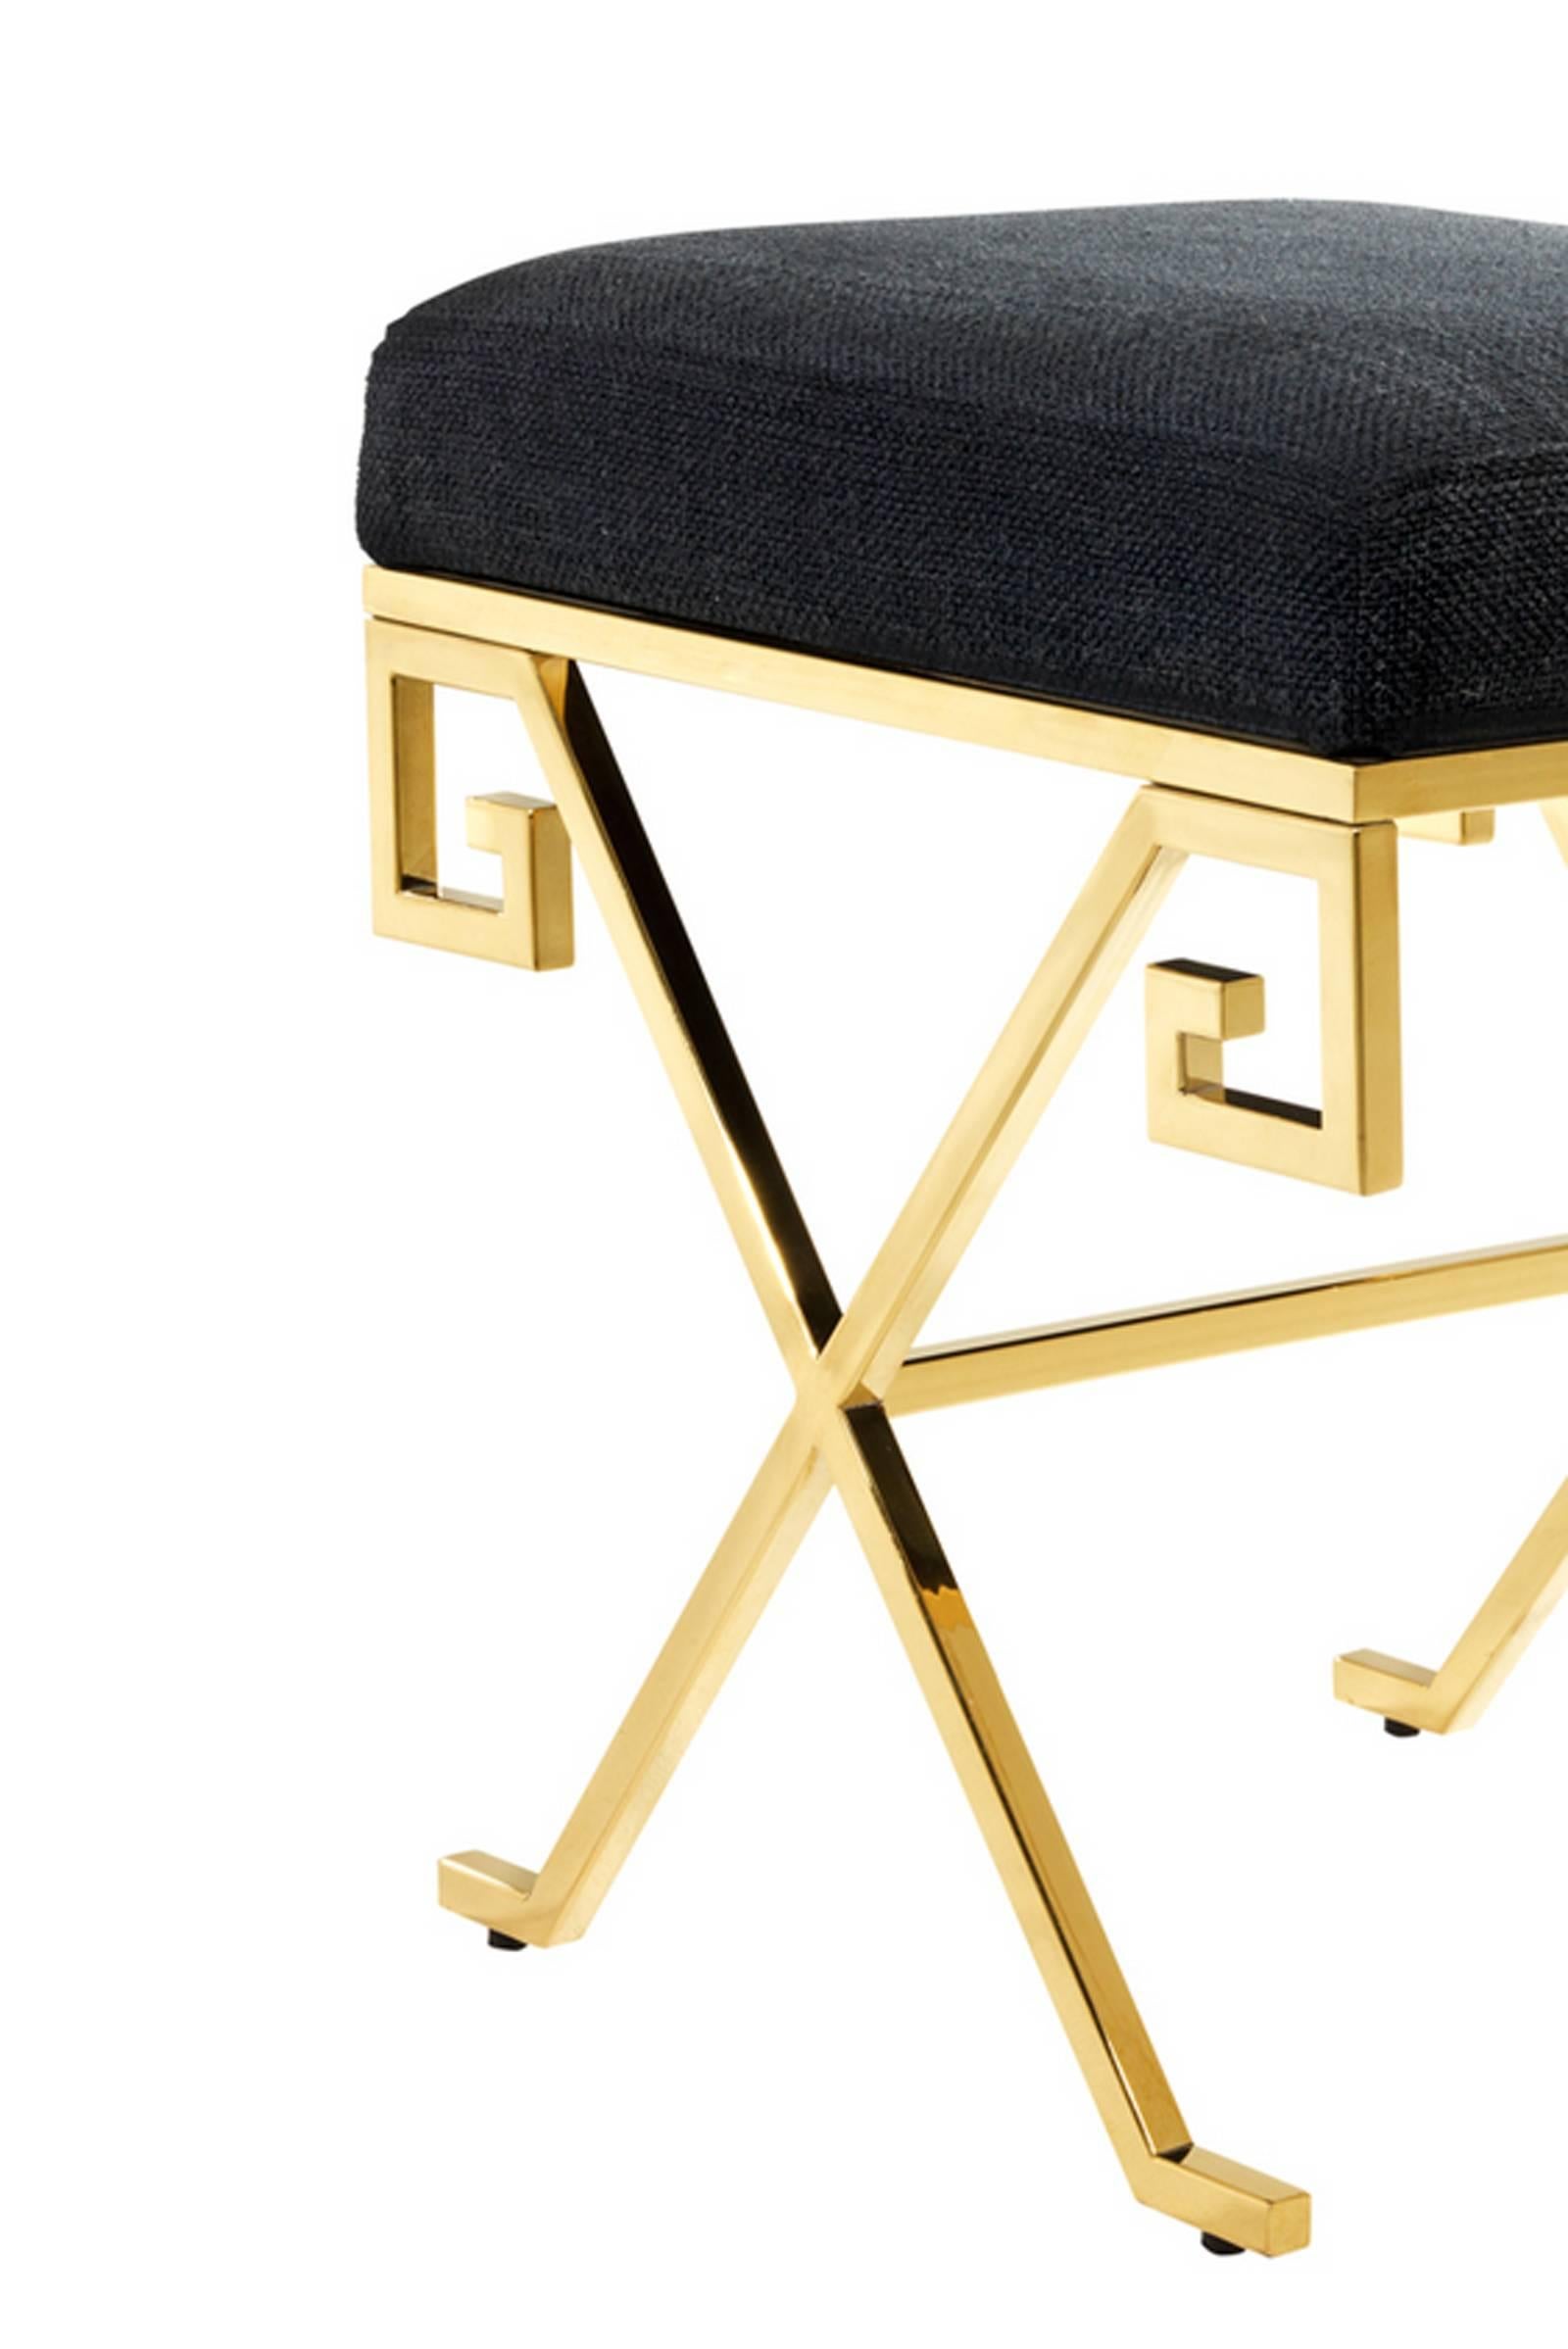 Contemporary Square Stool in Gold Finish or Polished Stainless Steel and Panama Fabric, 2016